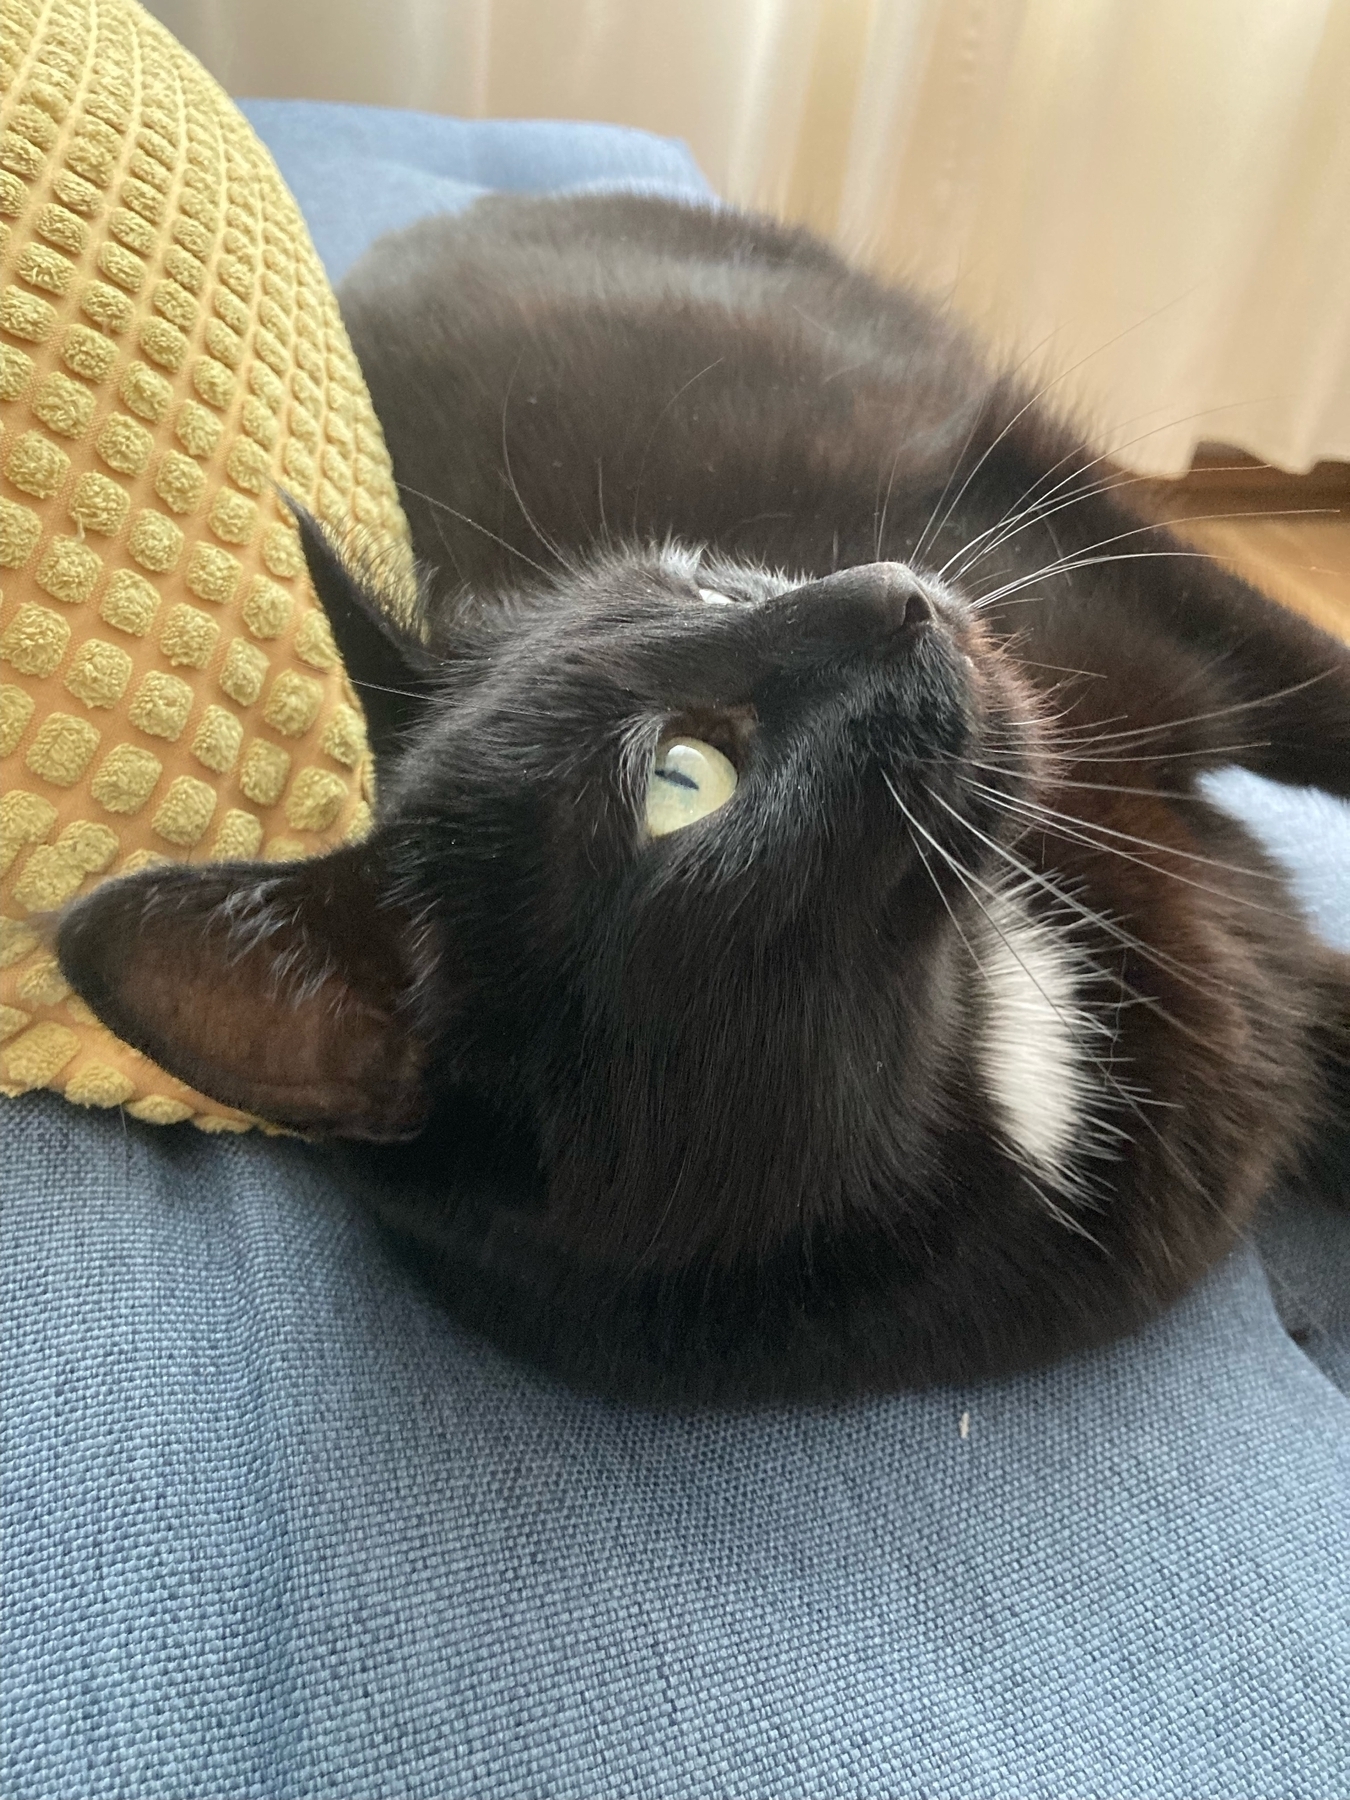 Kolka, a small black cat with a white spot on her chest, lies on a sofa and looks up